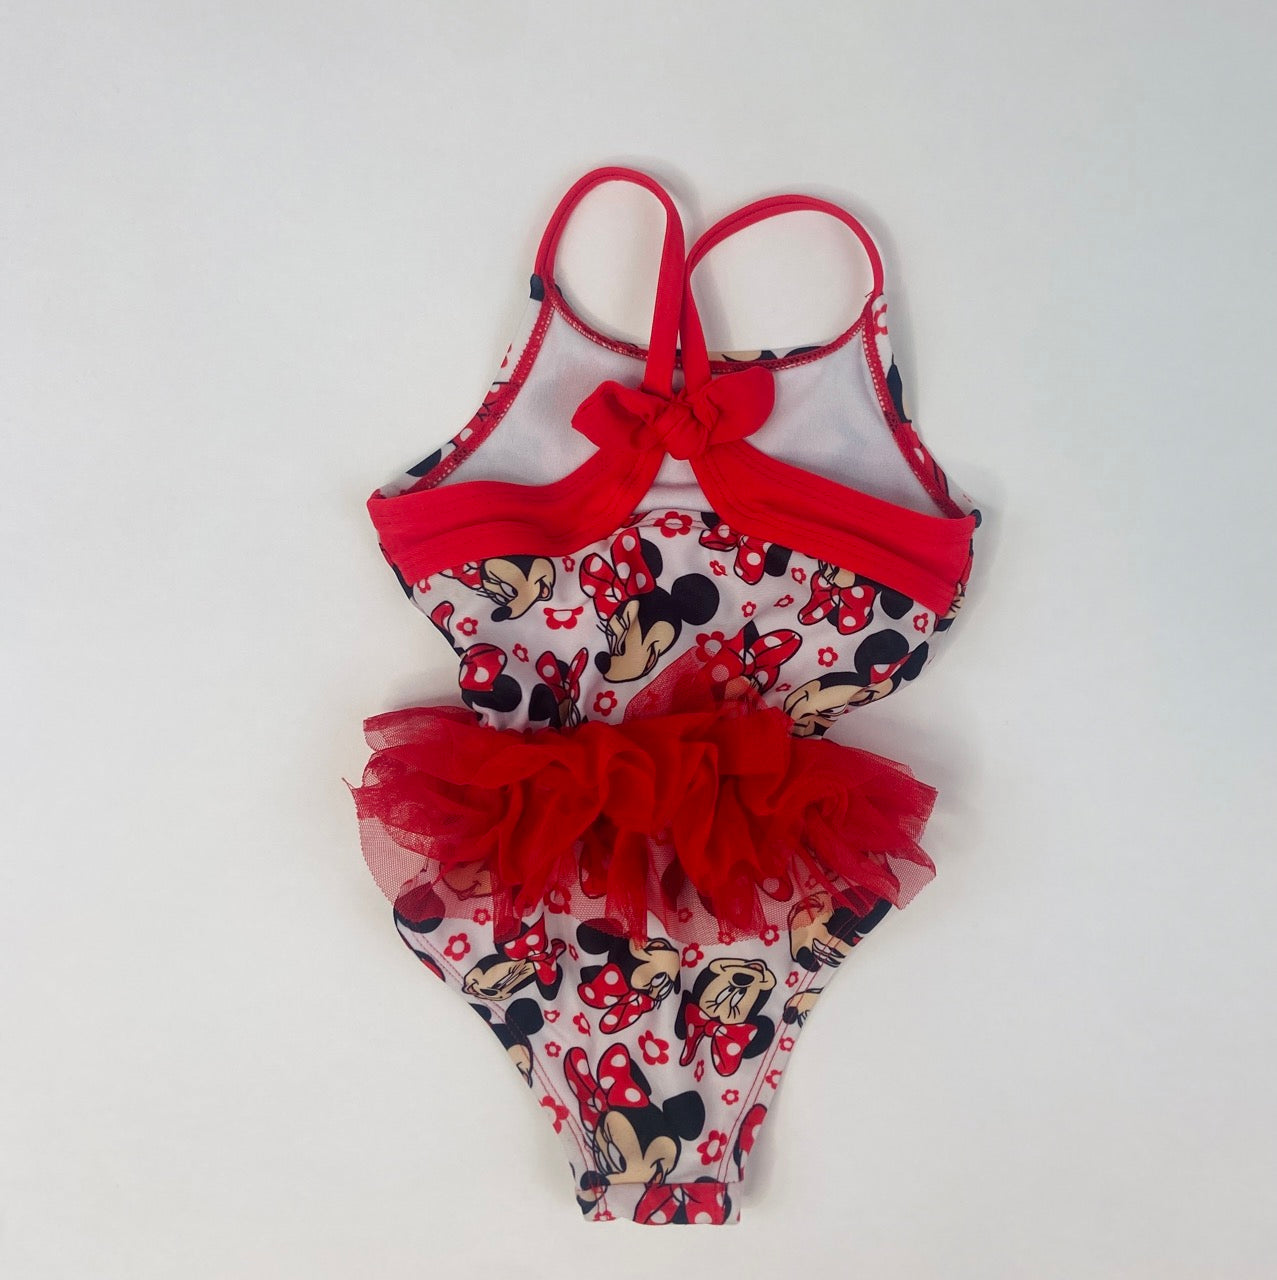 Minnie Mouse One Piece Tutu Swimsuit- 18 Months